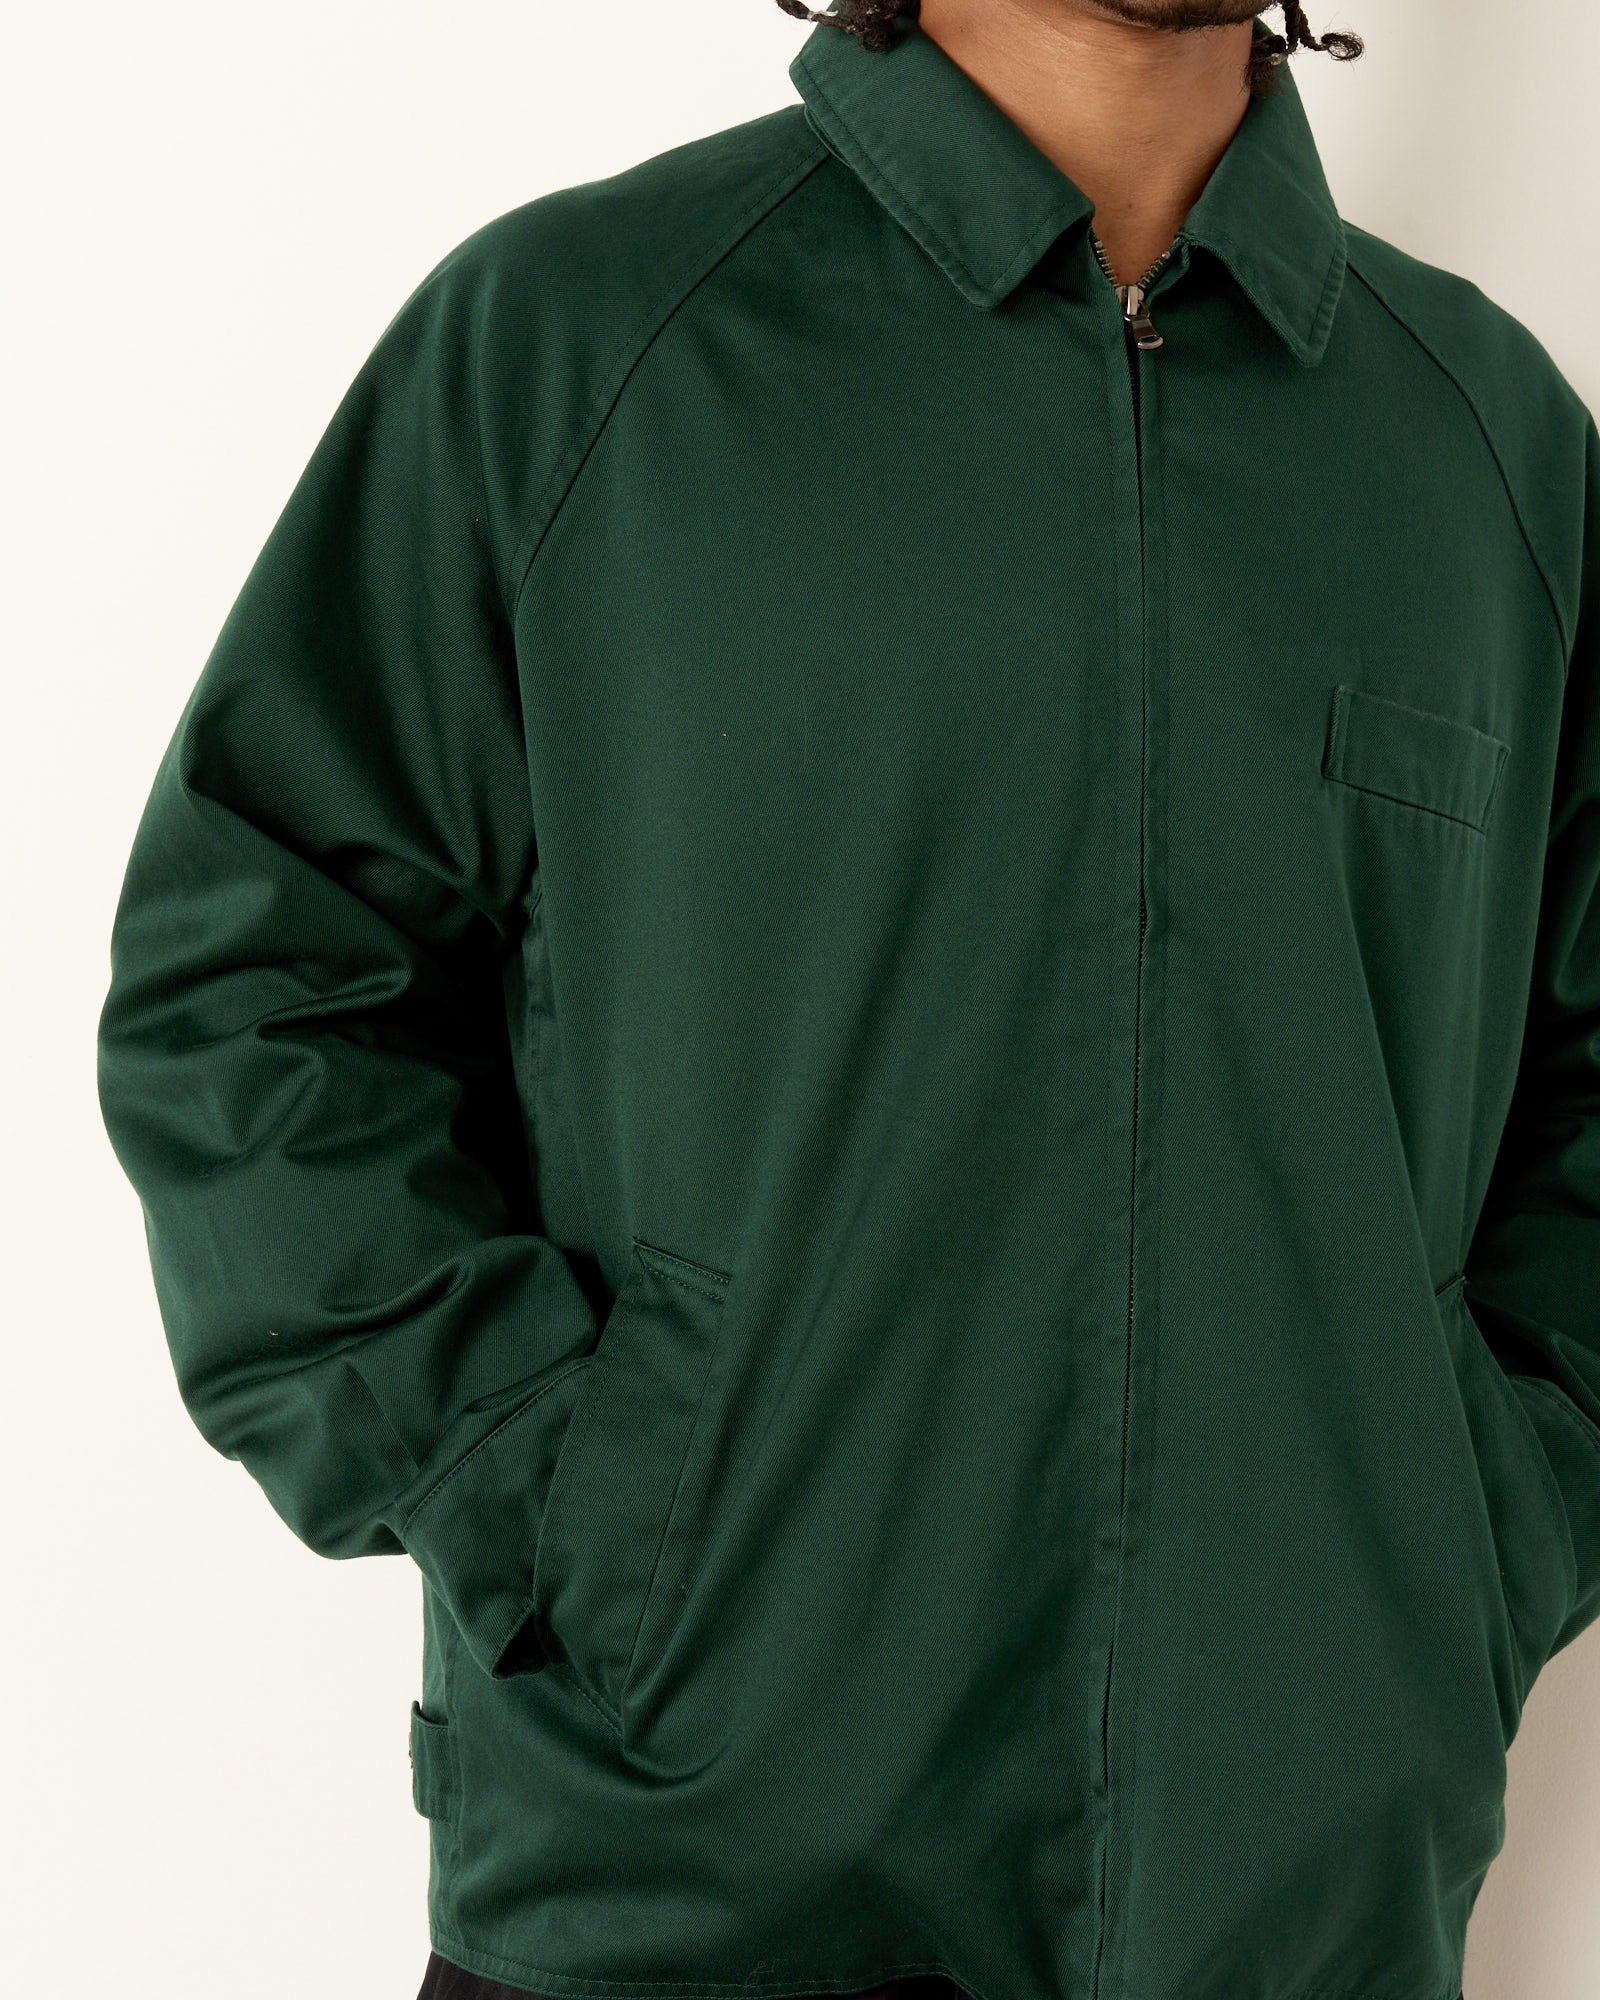 Windstopper Chino Crew Jacket in Green